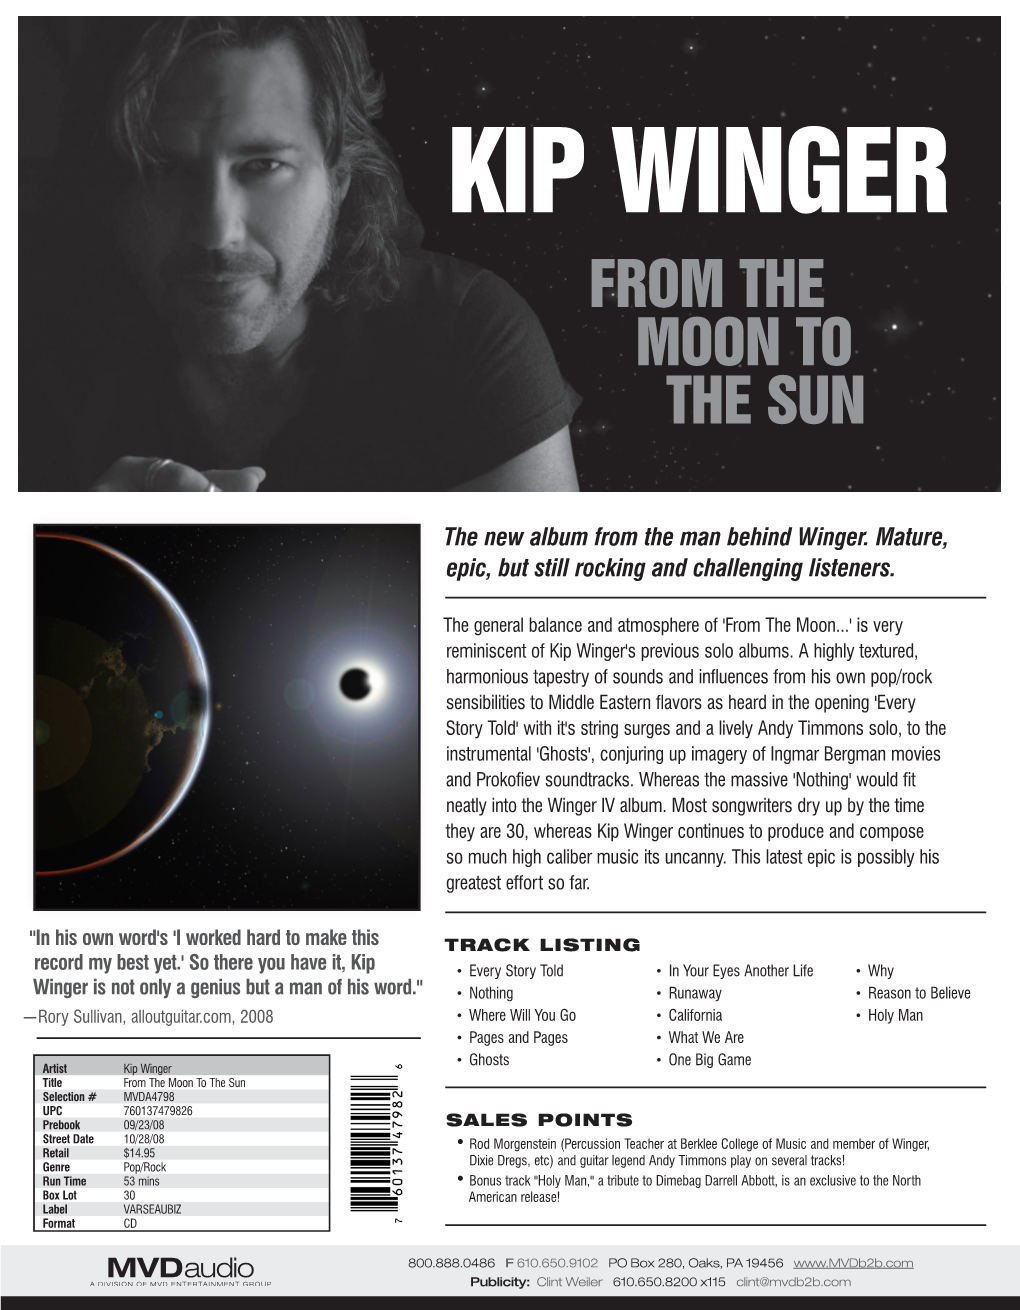 Kip Winger from the Moon to the Sun